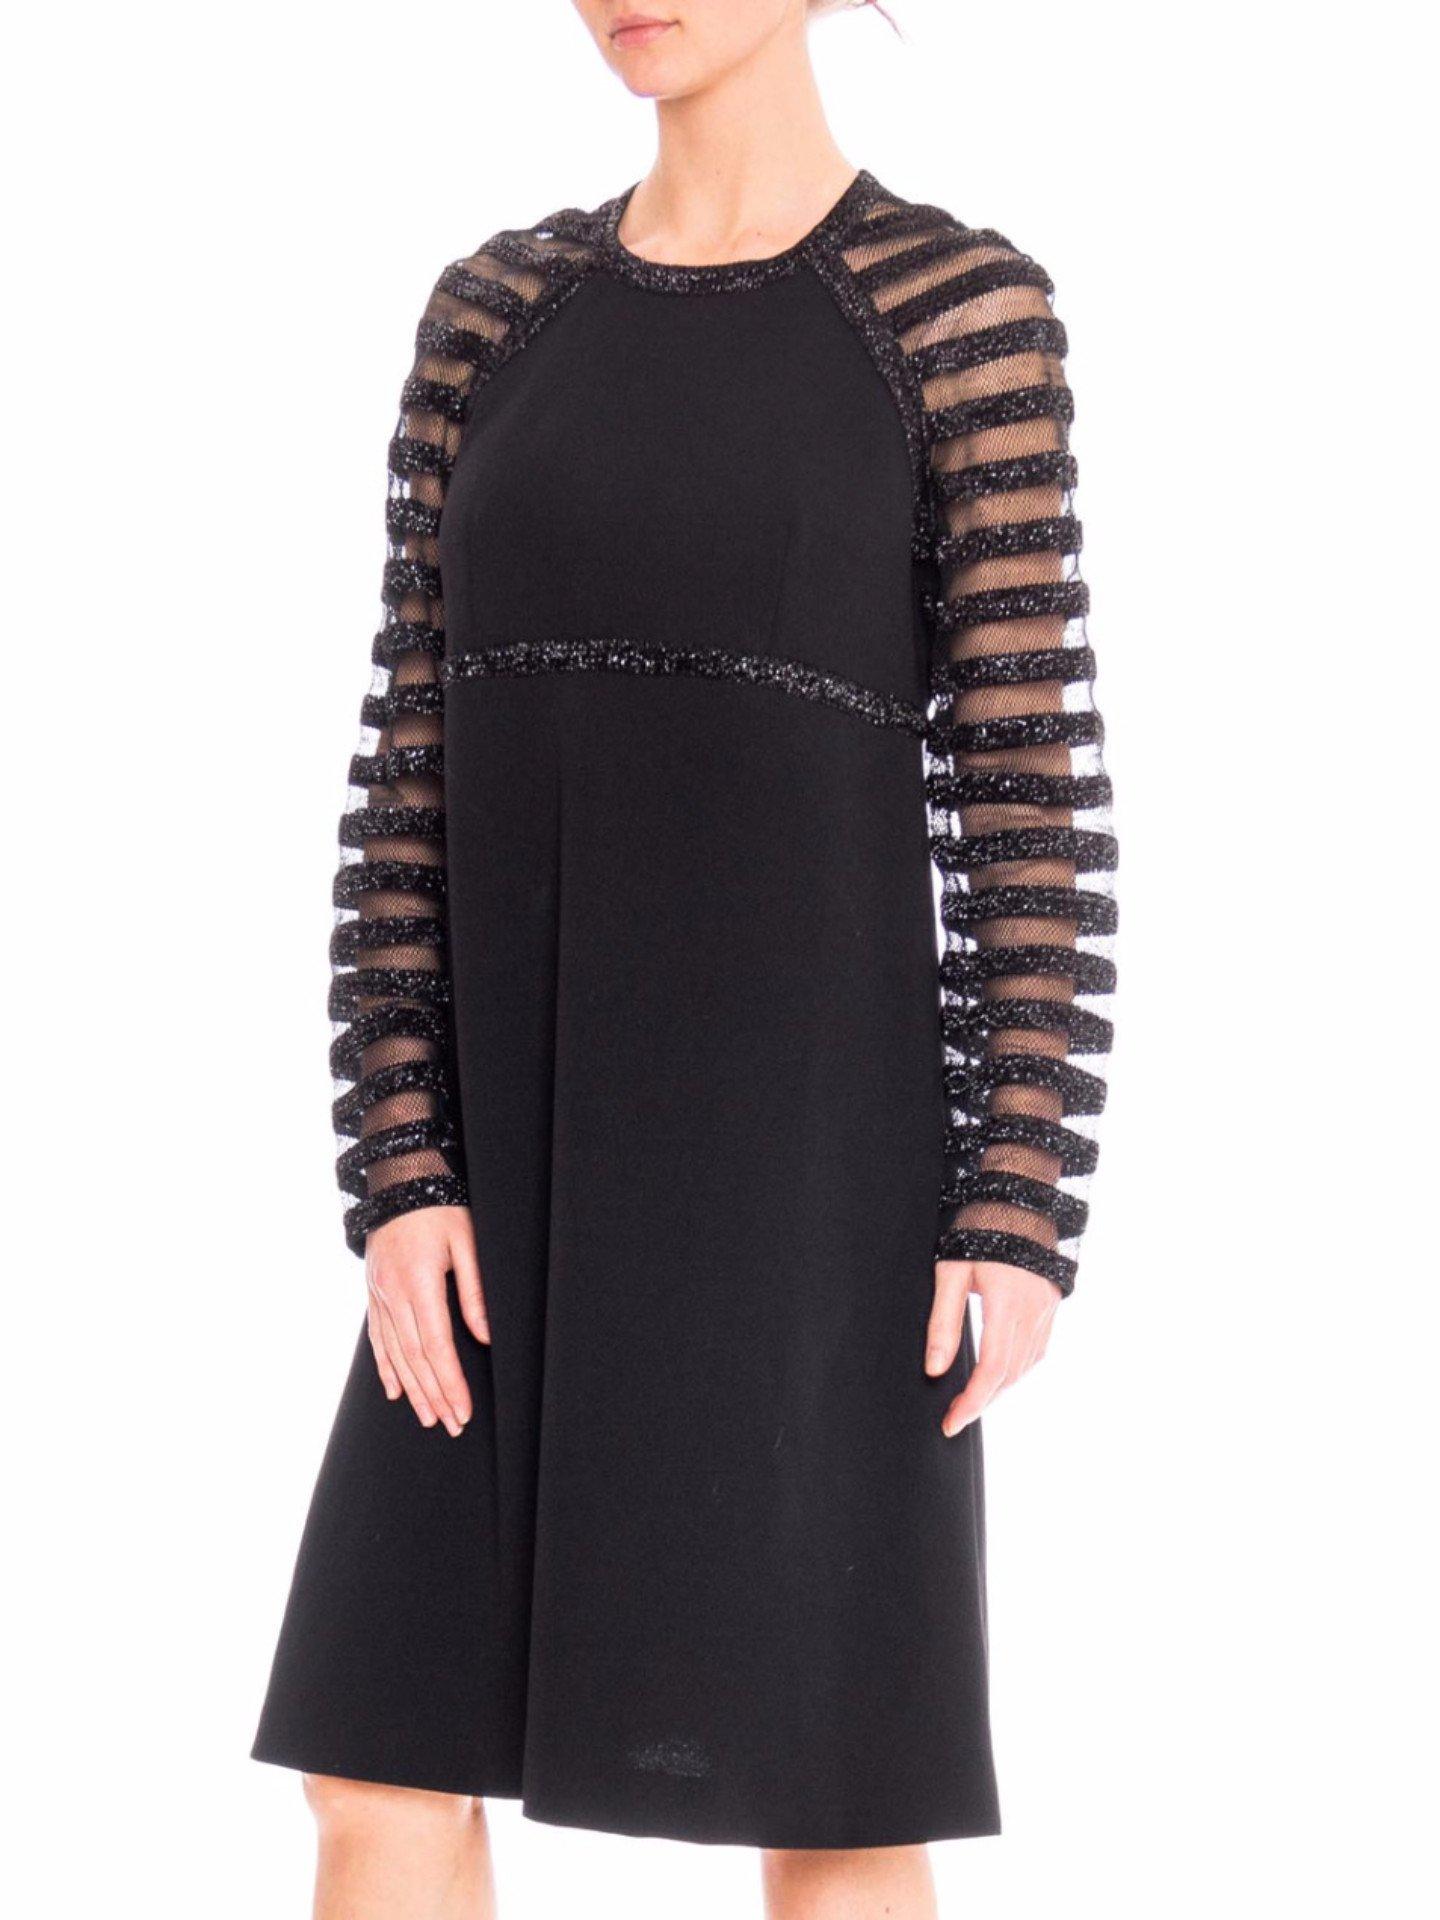 1960S JACQUELINE VANOYE Black Polyester Knit MOD Cocktail Dress With Mesh Lurex For Sale 3